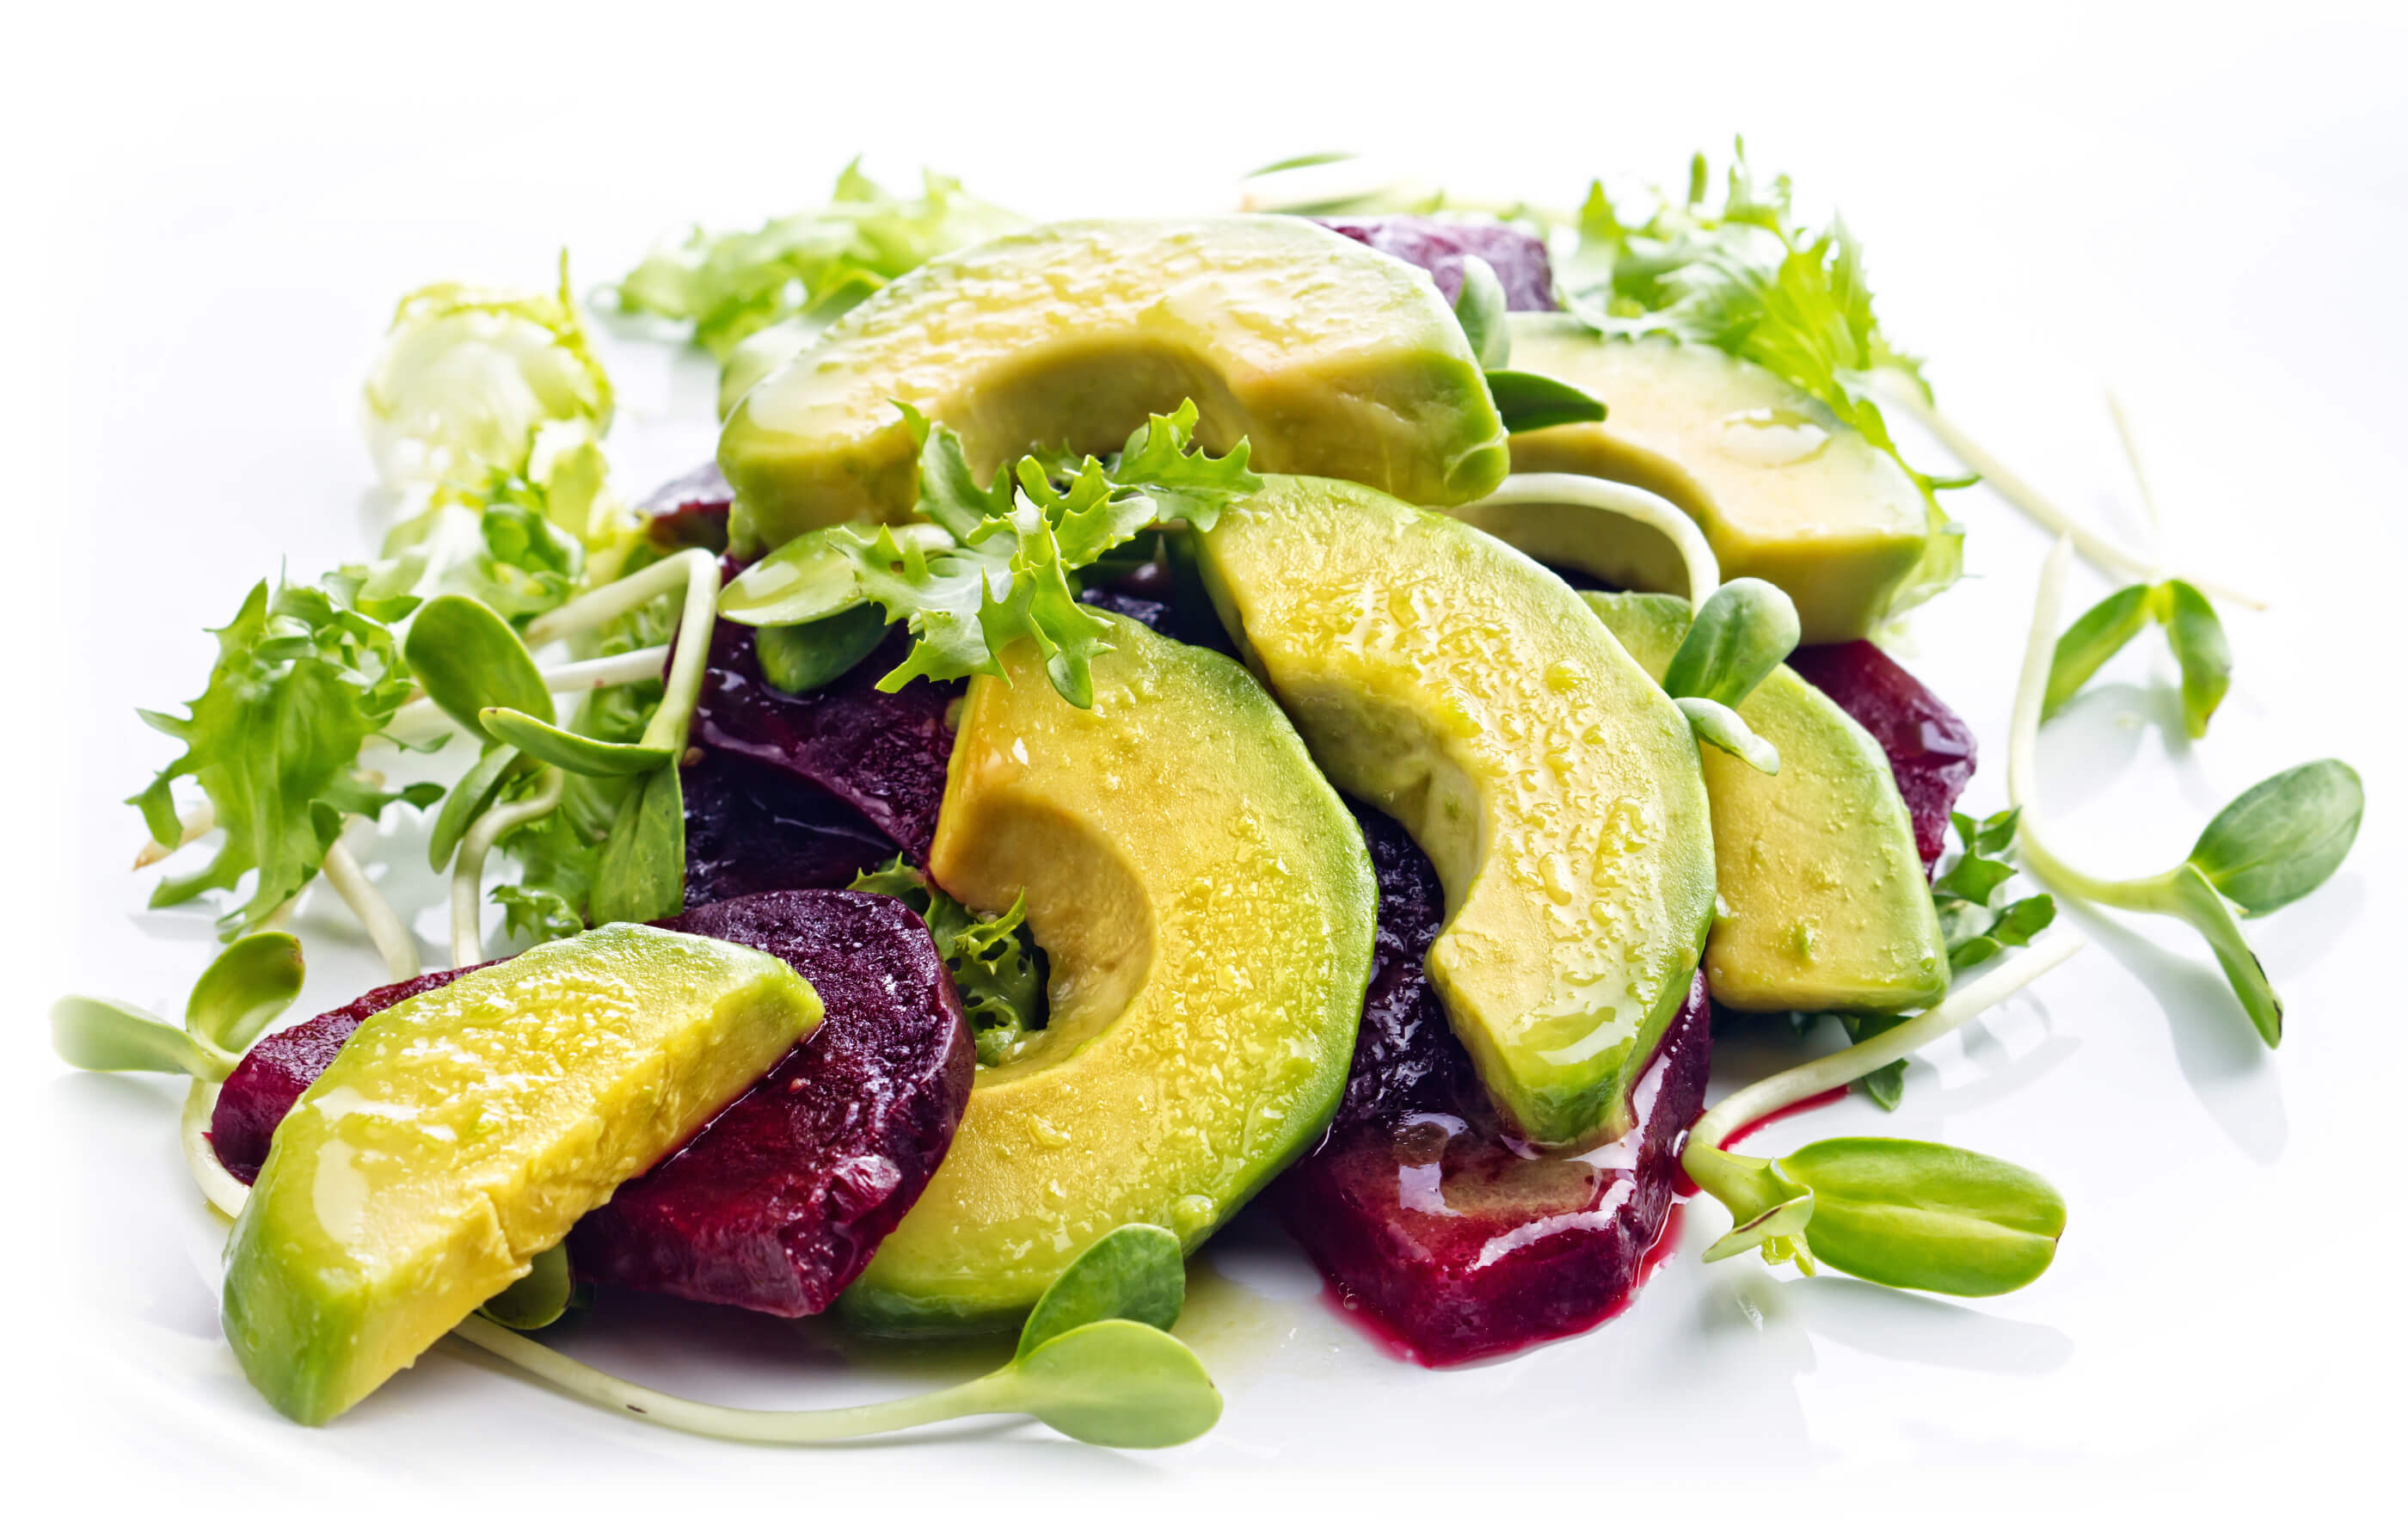 Full spread image of an avocado and beetroot salad, with watercress and olive oil dressing